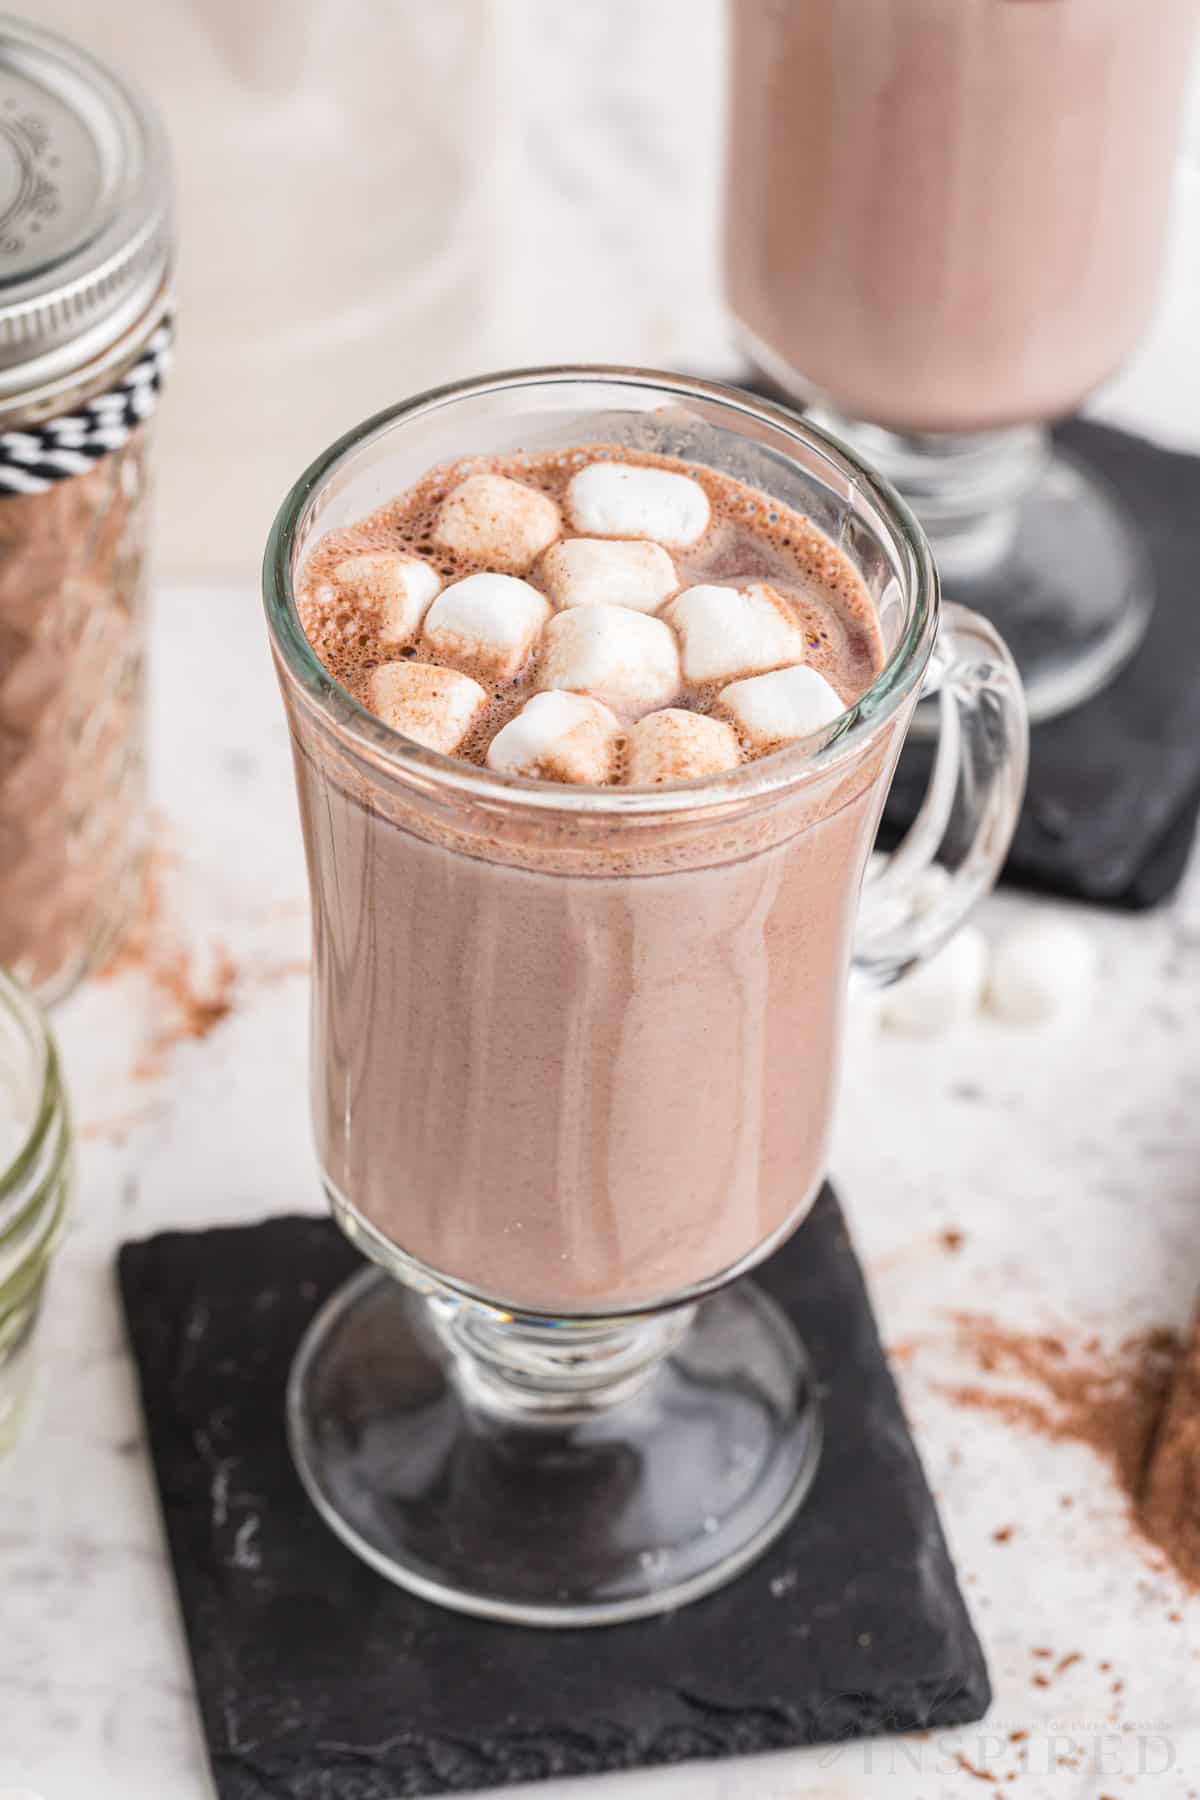 Two tall glasses with hot cocoa and mini marshmallow topping on top of black coasters, glass sealed jar filled with homemade hot cocoa mix, on a marble countertop.